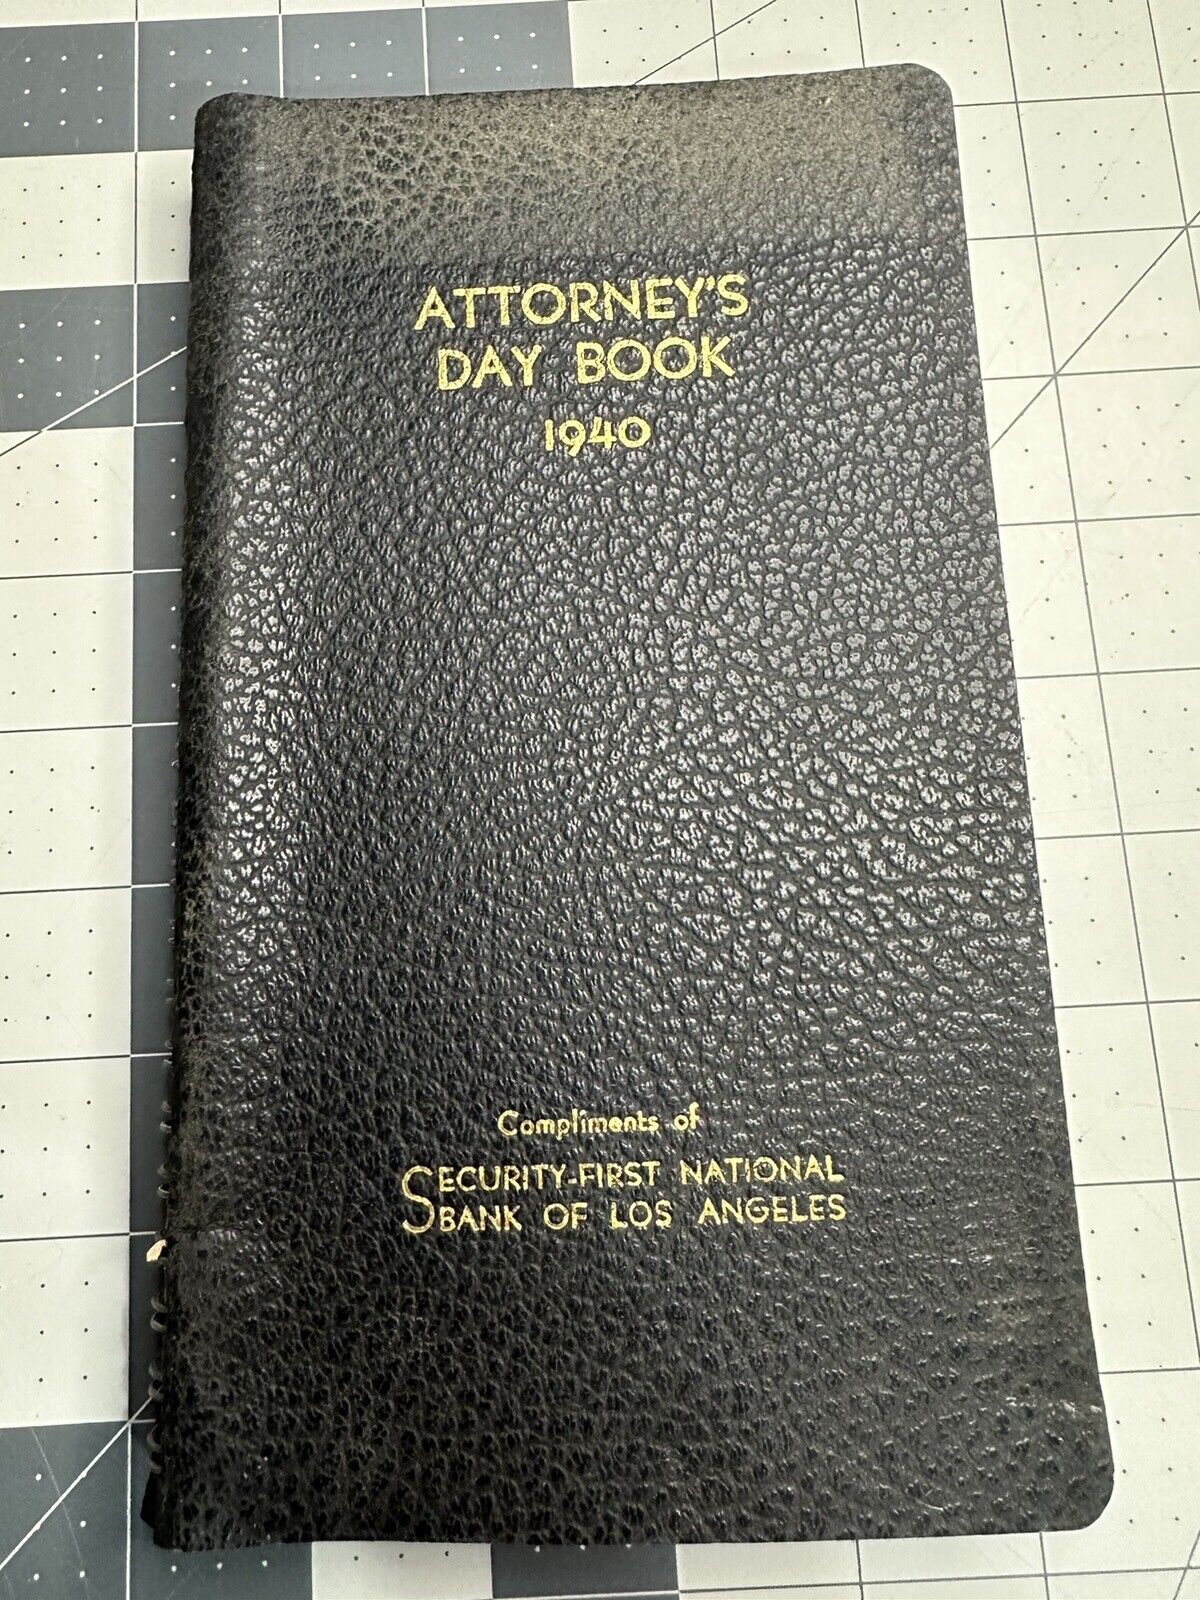 Vtg 1940 ATTORNEY\'S DAY BOOK Date Security First National Bank Los Angeles, CA